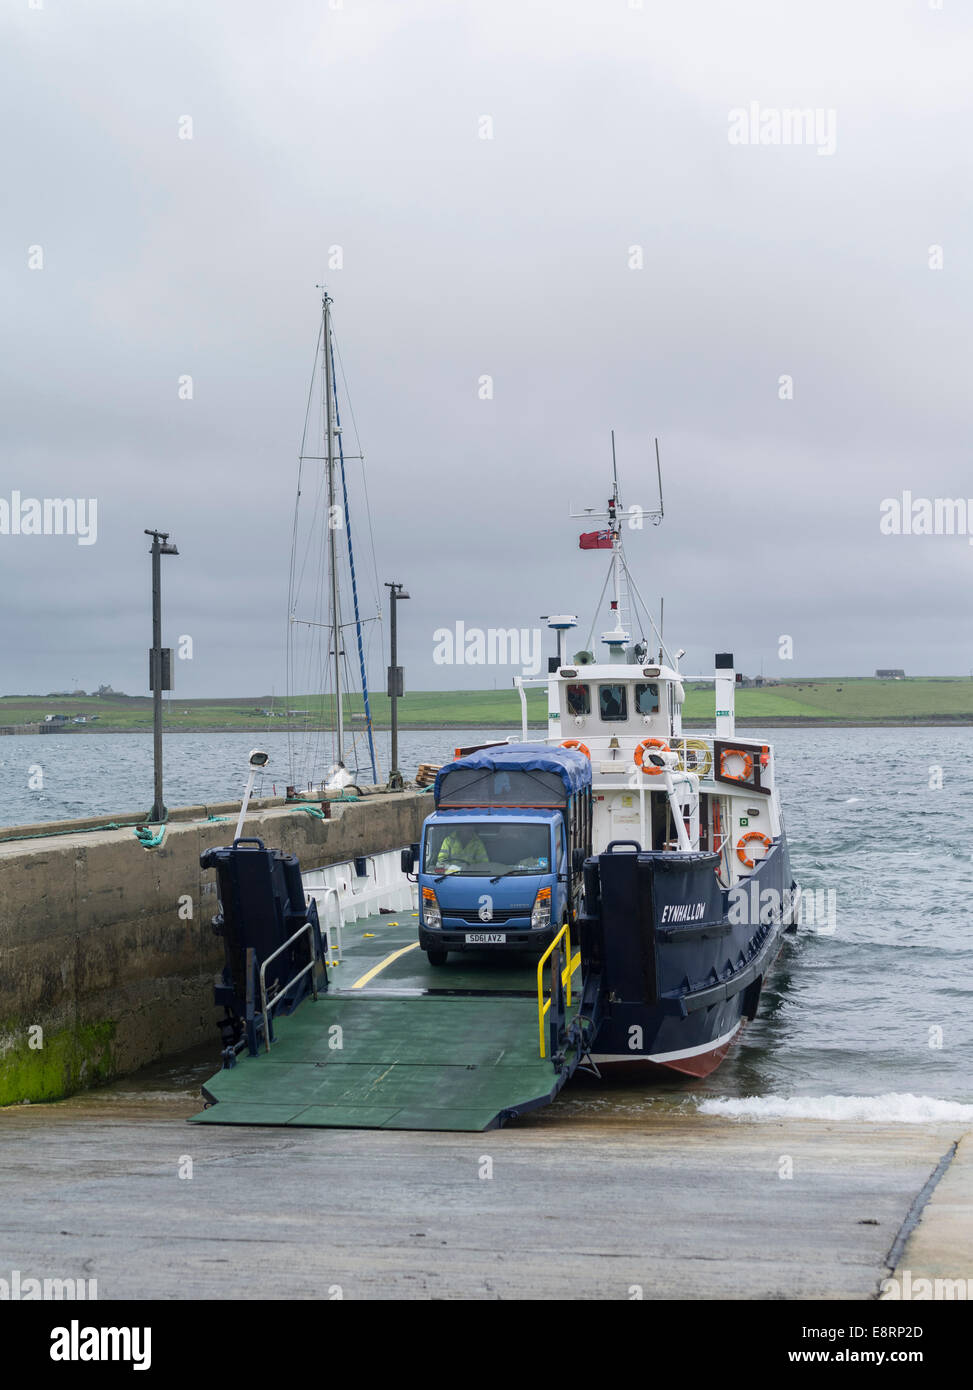 Rousay island harbor during rain and storm, ferry to Orkney Mainland, Orkney islands, Scotland. Stock Photo